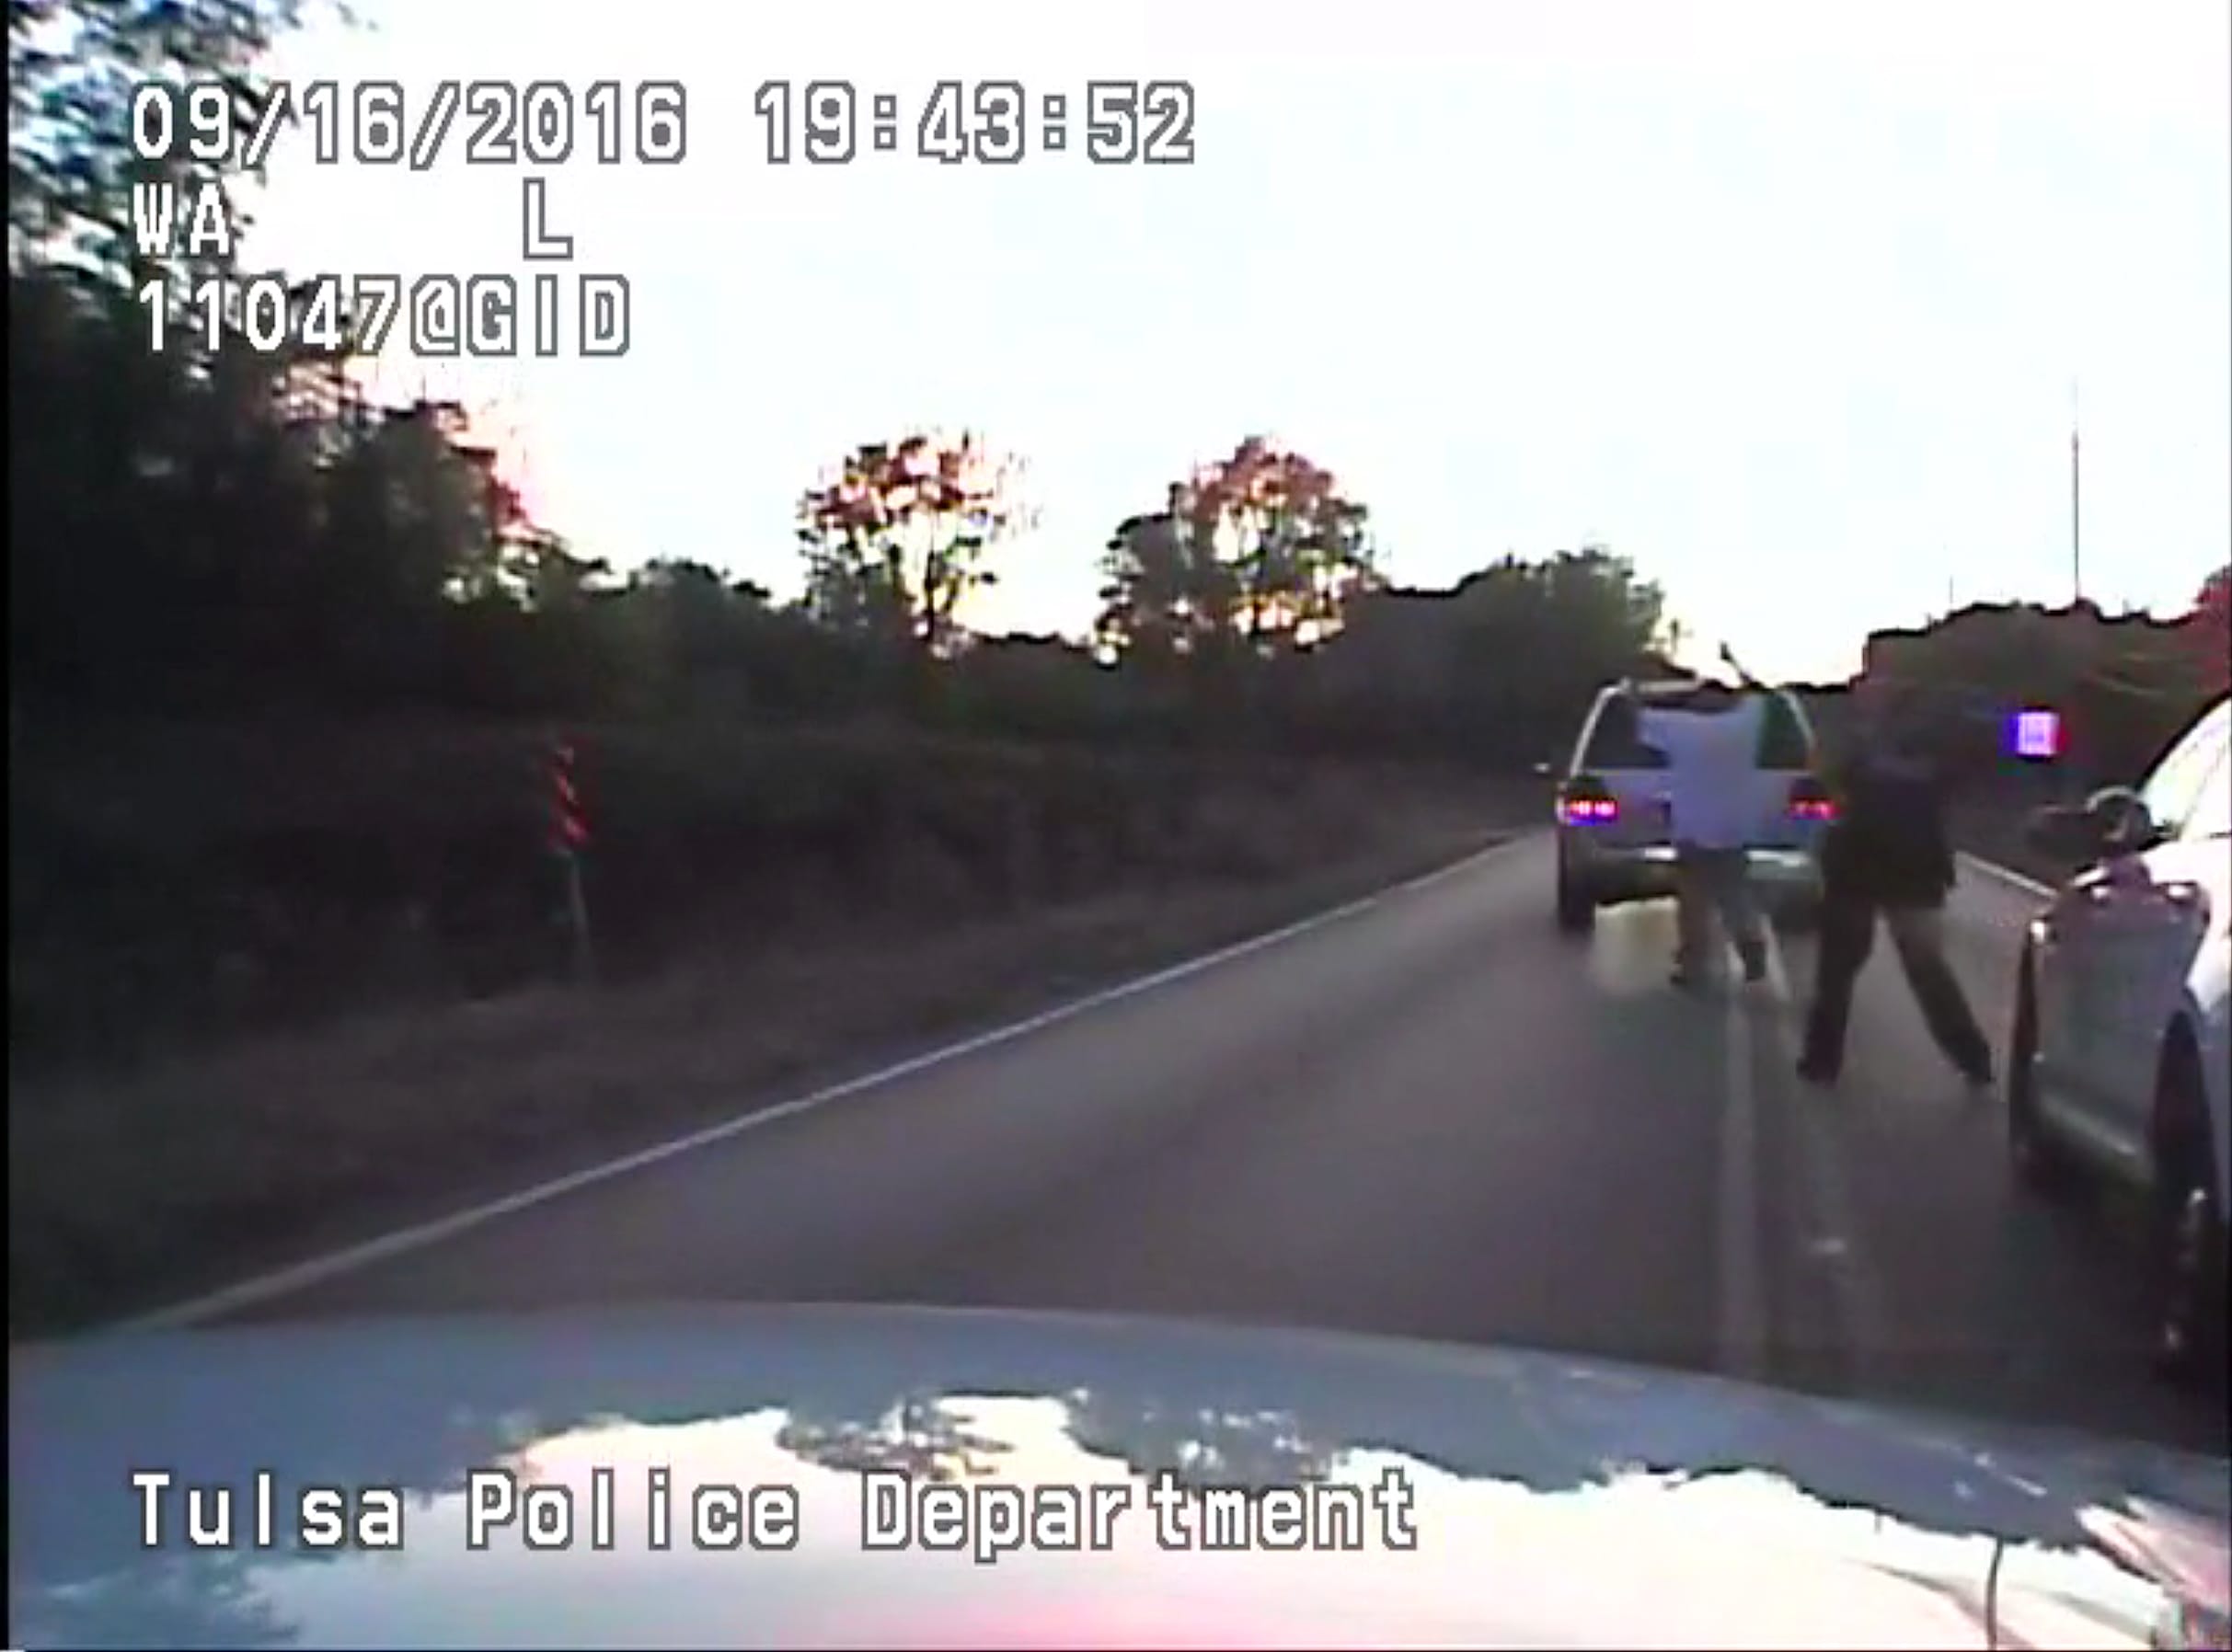 In this image made from a Friday, Sept. 16, 2016 police video, Terence Crutcher, left, is pursued by police officers as he walks to an SUV in Tulsa, Okla. Crutcher was fatally shot Friday after authorities say an officer stopped to investigate the stalled vehicle and Crutcher approached after officers arrived to assist. Crutcher had no weapon on him or in his SUV, Tulsa Police Chief Chuck Jordan said Monday, Sept. 19, 2016.